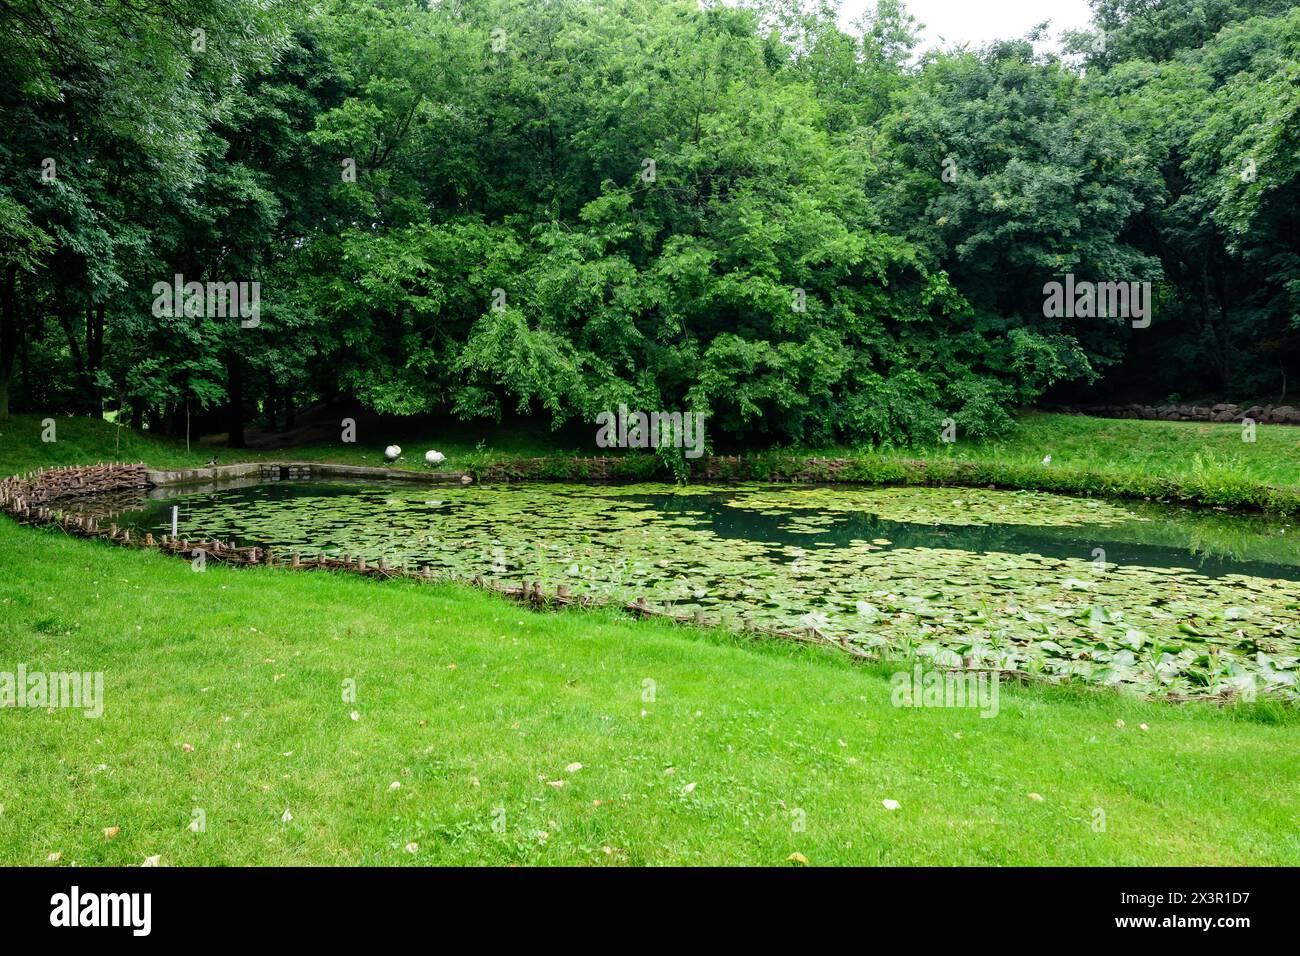 Vivid landscape in Alexandru Buia Botanical Garden from Craiova in Dolj county, Romania, with lake, waterlillies and large green tres in a beautiful s Stock Photo